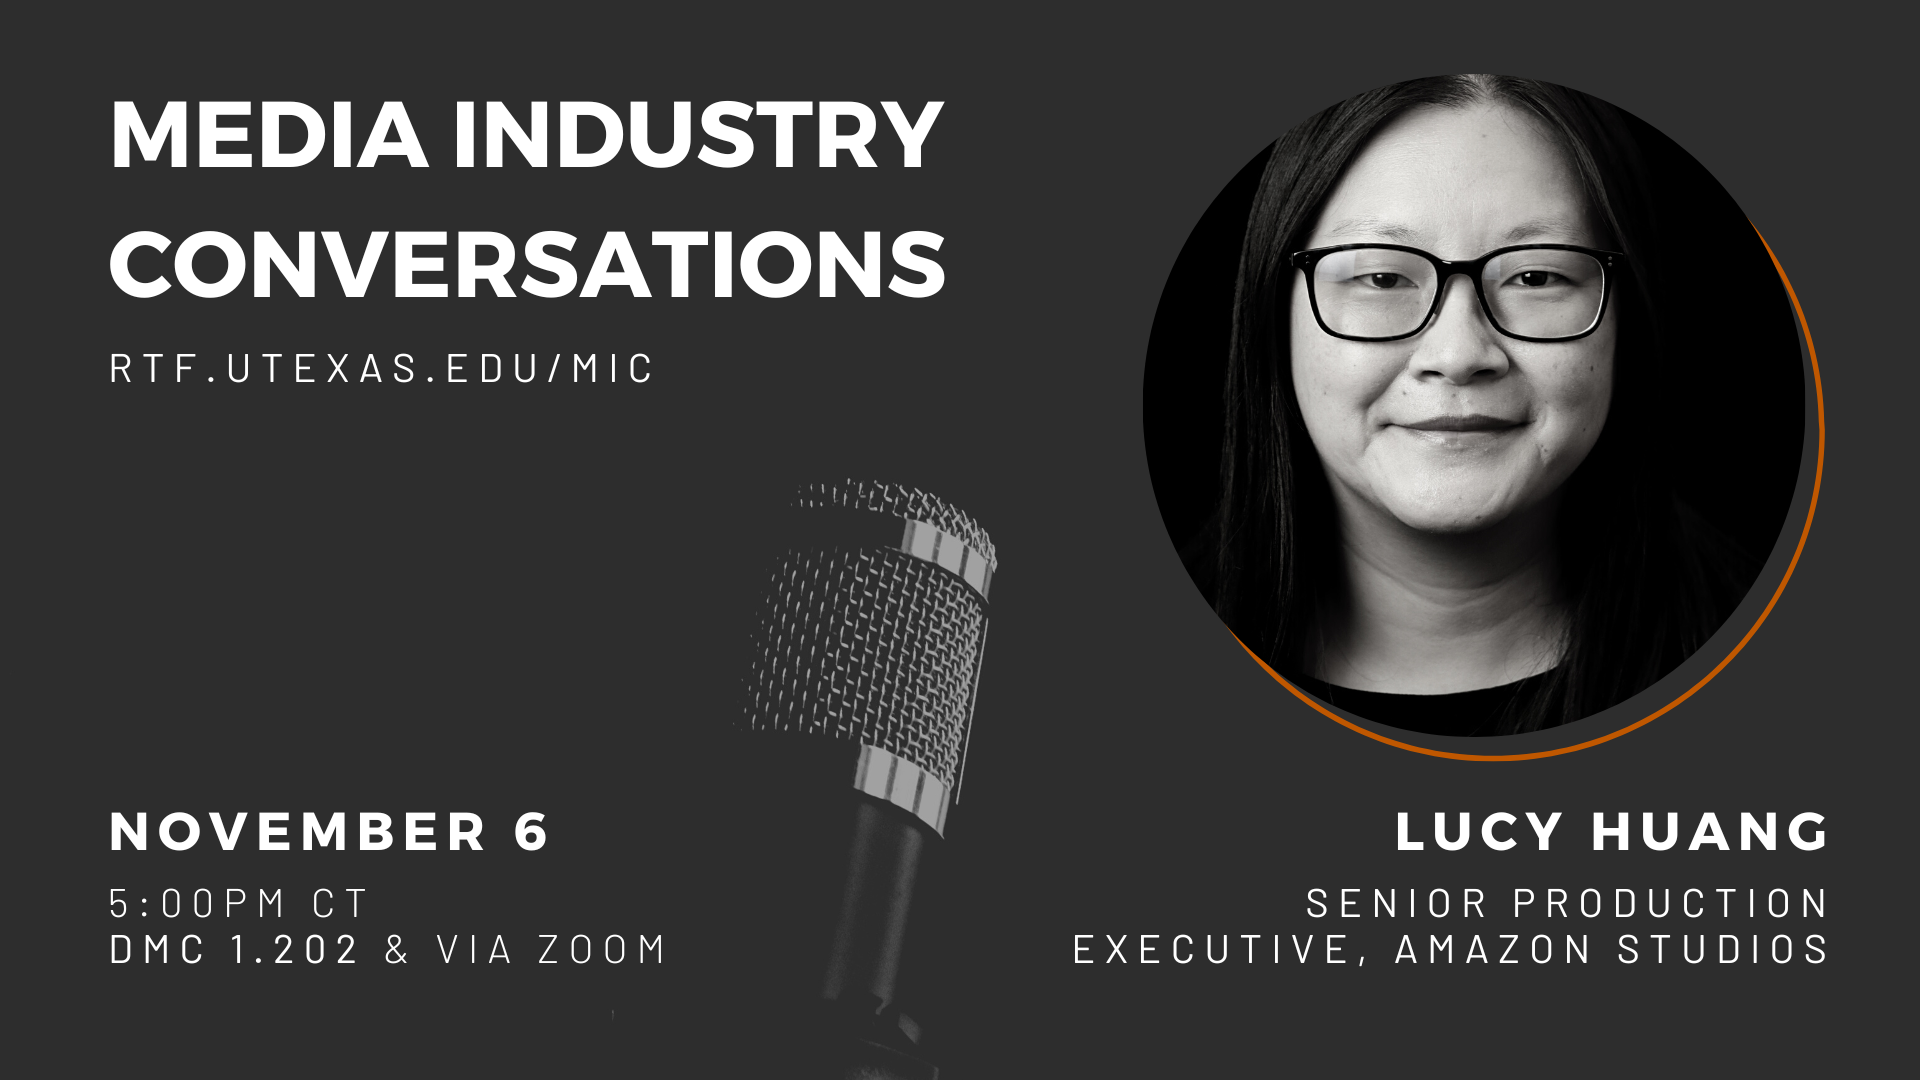 MIC, Lucy Huang, Amazon, November 6th, 5-6:15pm